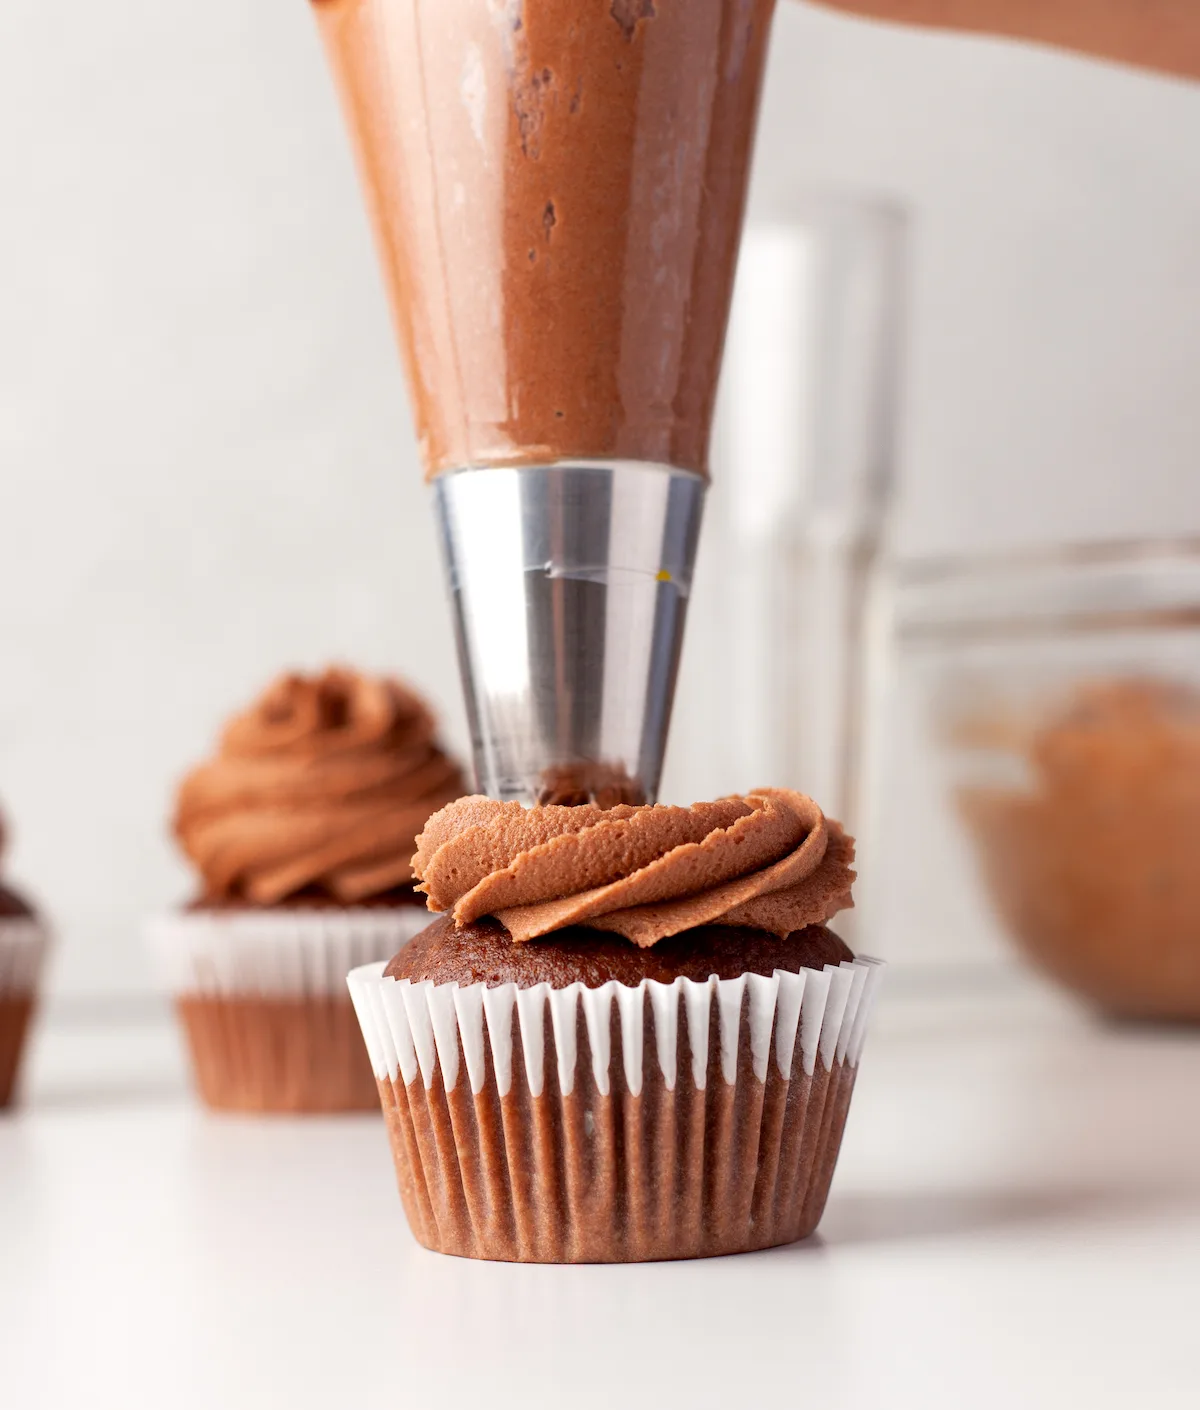 Piping chocolate frosting onto chocolate cupcakes